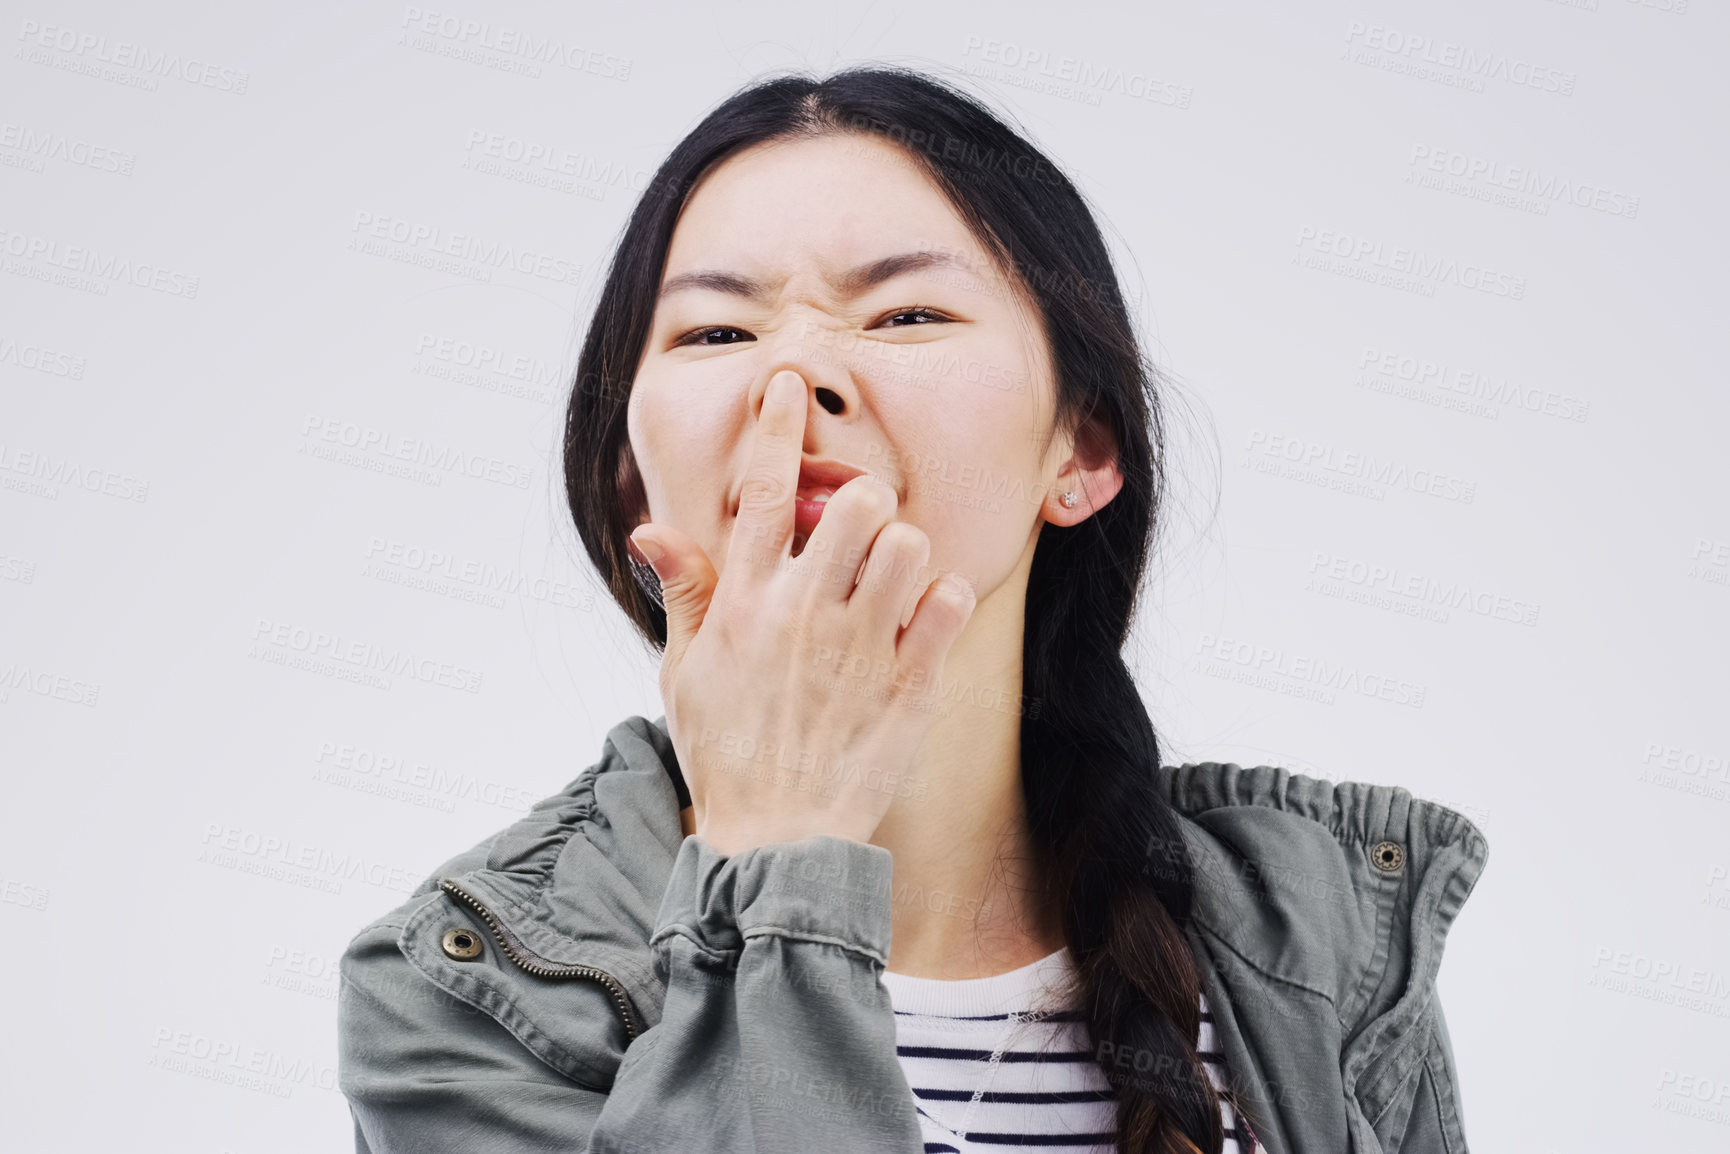 Buy stock photo Portrait, funny face and nose with an asian woman in studio on gray background looking silly or goofy. Comedy, comic and crazy with a happy young female person joking indoor for playful fun or humor